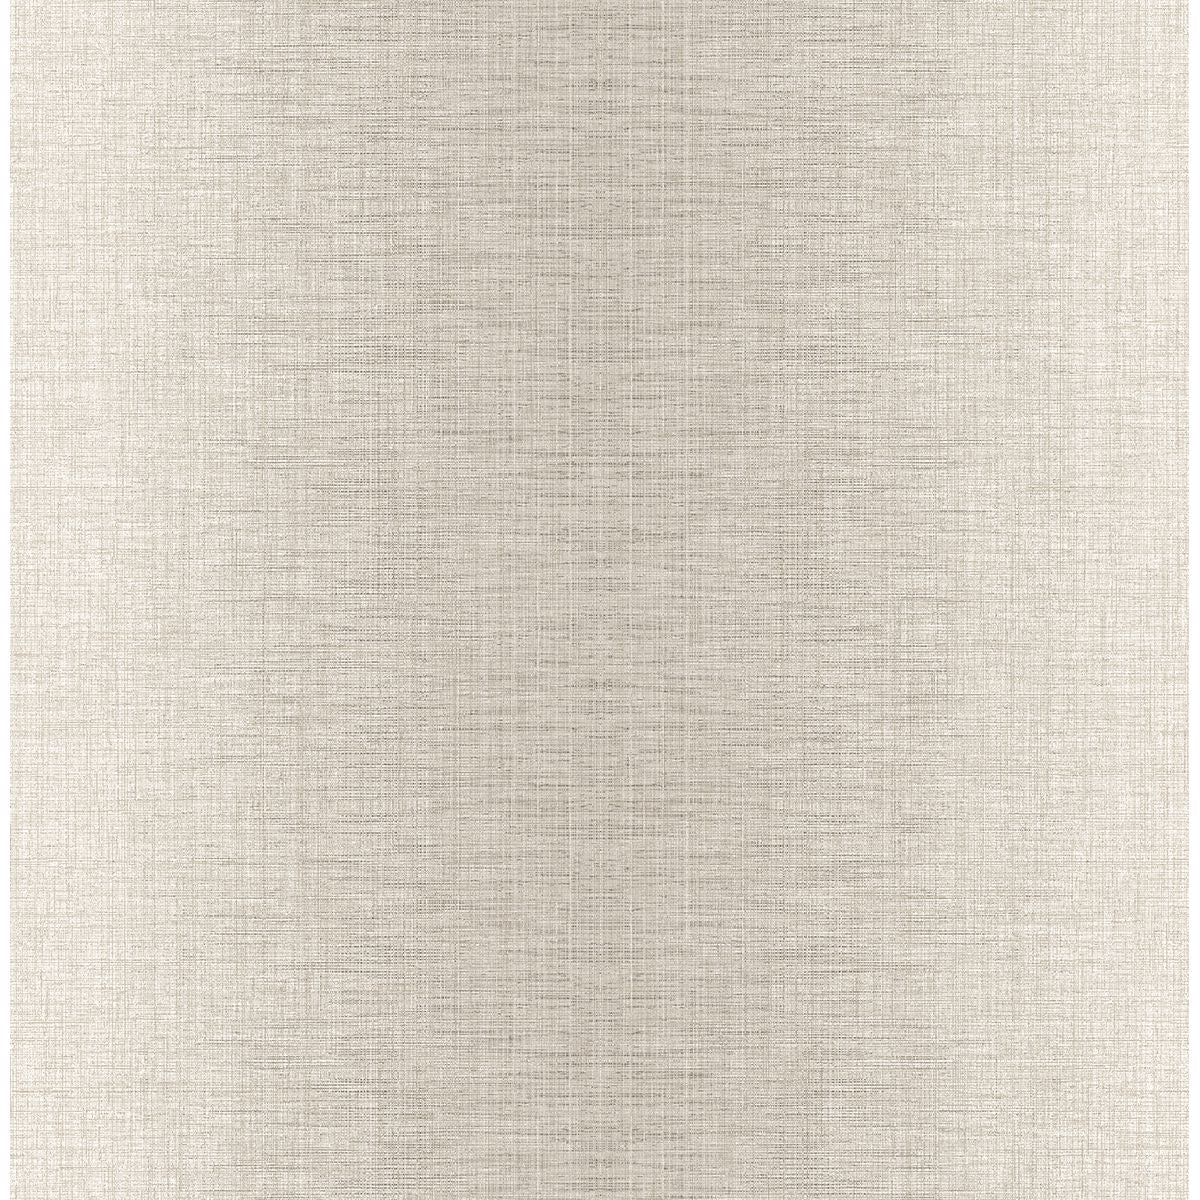 Sample Stardust Ombre Wallpaper in Beige from the Moonlight Collection by Brewster Home Fashions